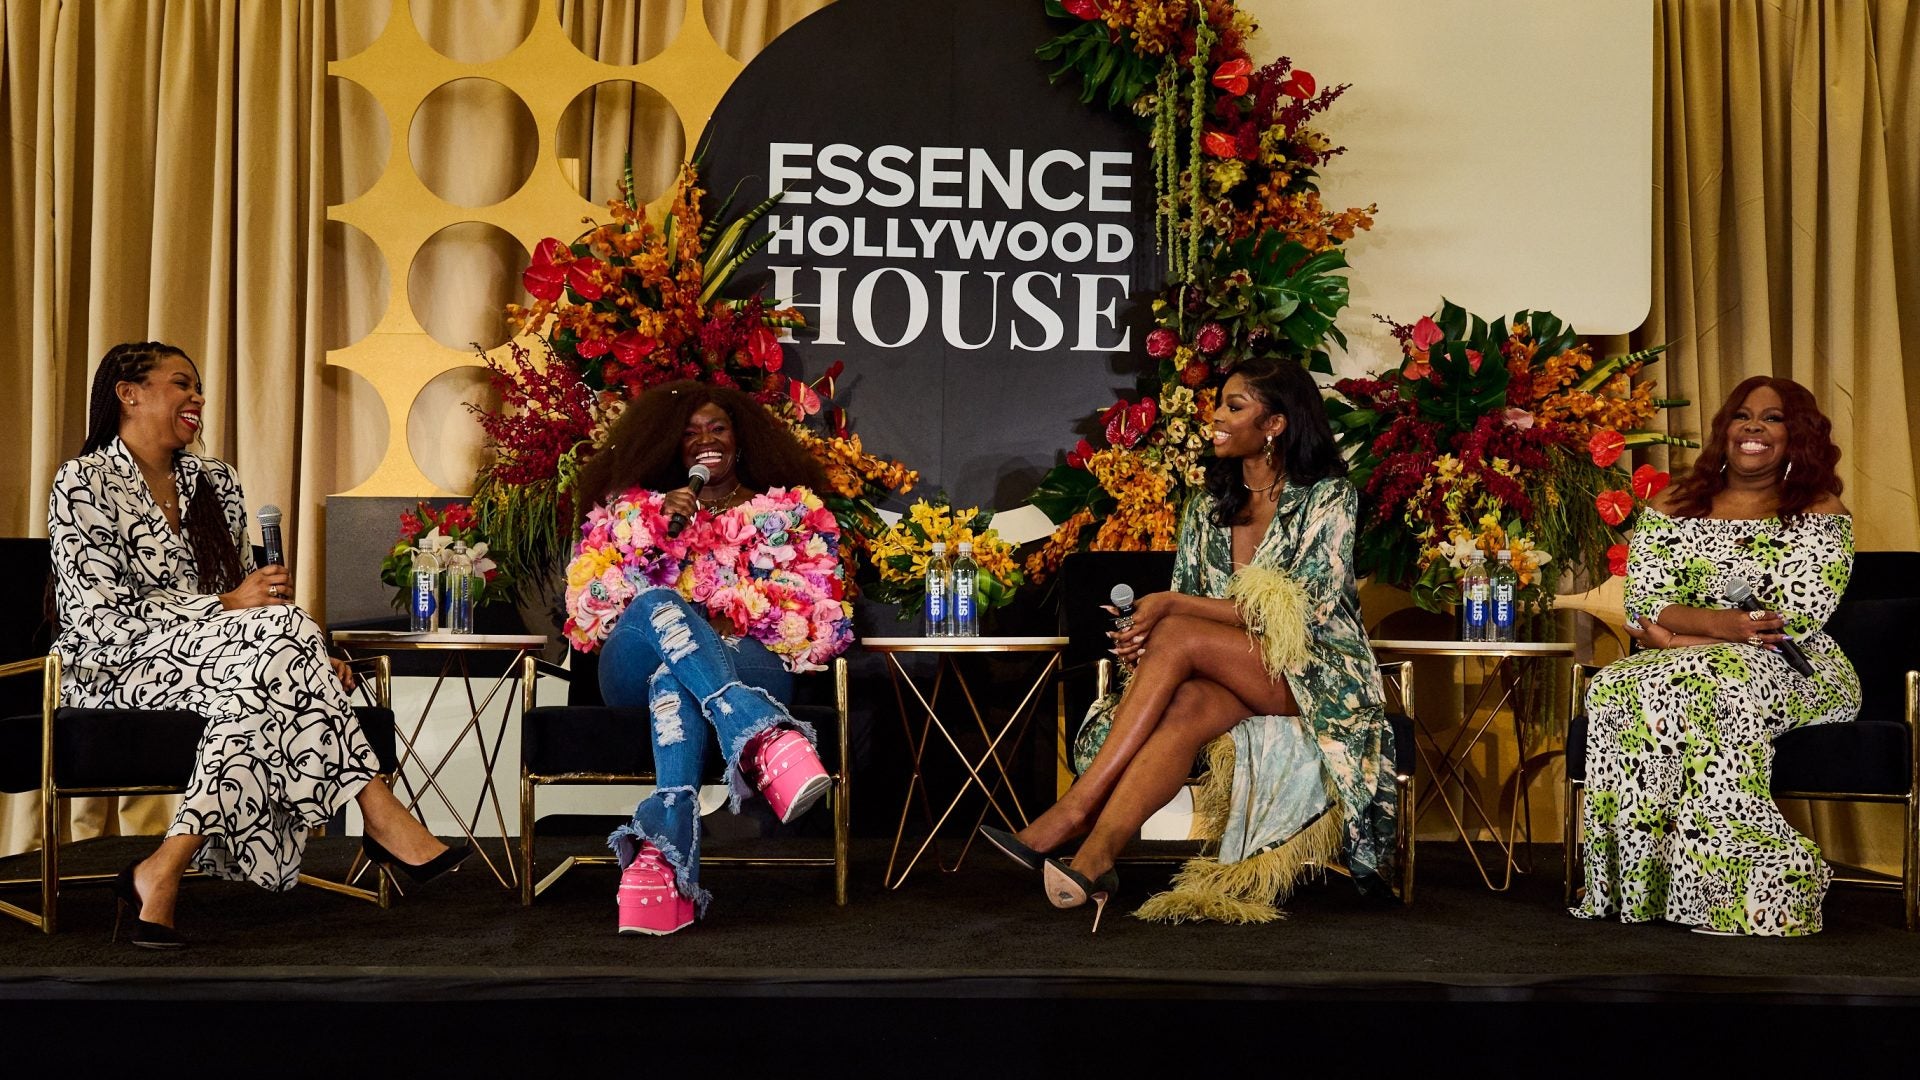 WATCH: This Conversation With Coco Jones, Amber Riley & Shoniqua Shandai Is The Black Girl Pick Me Up You Need This Week